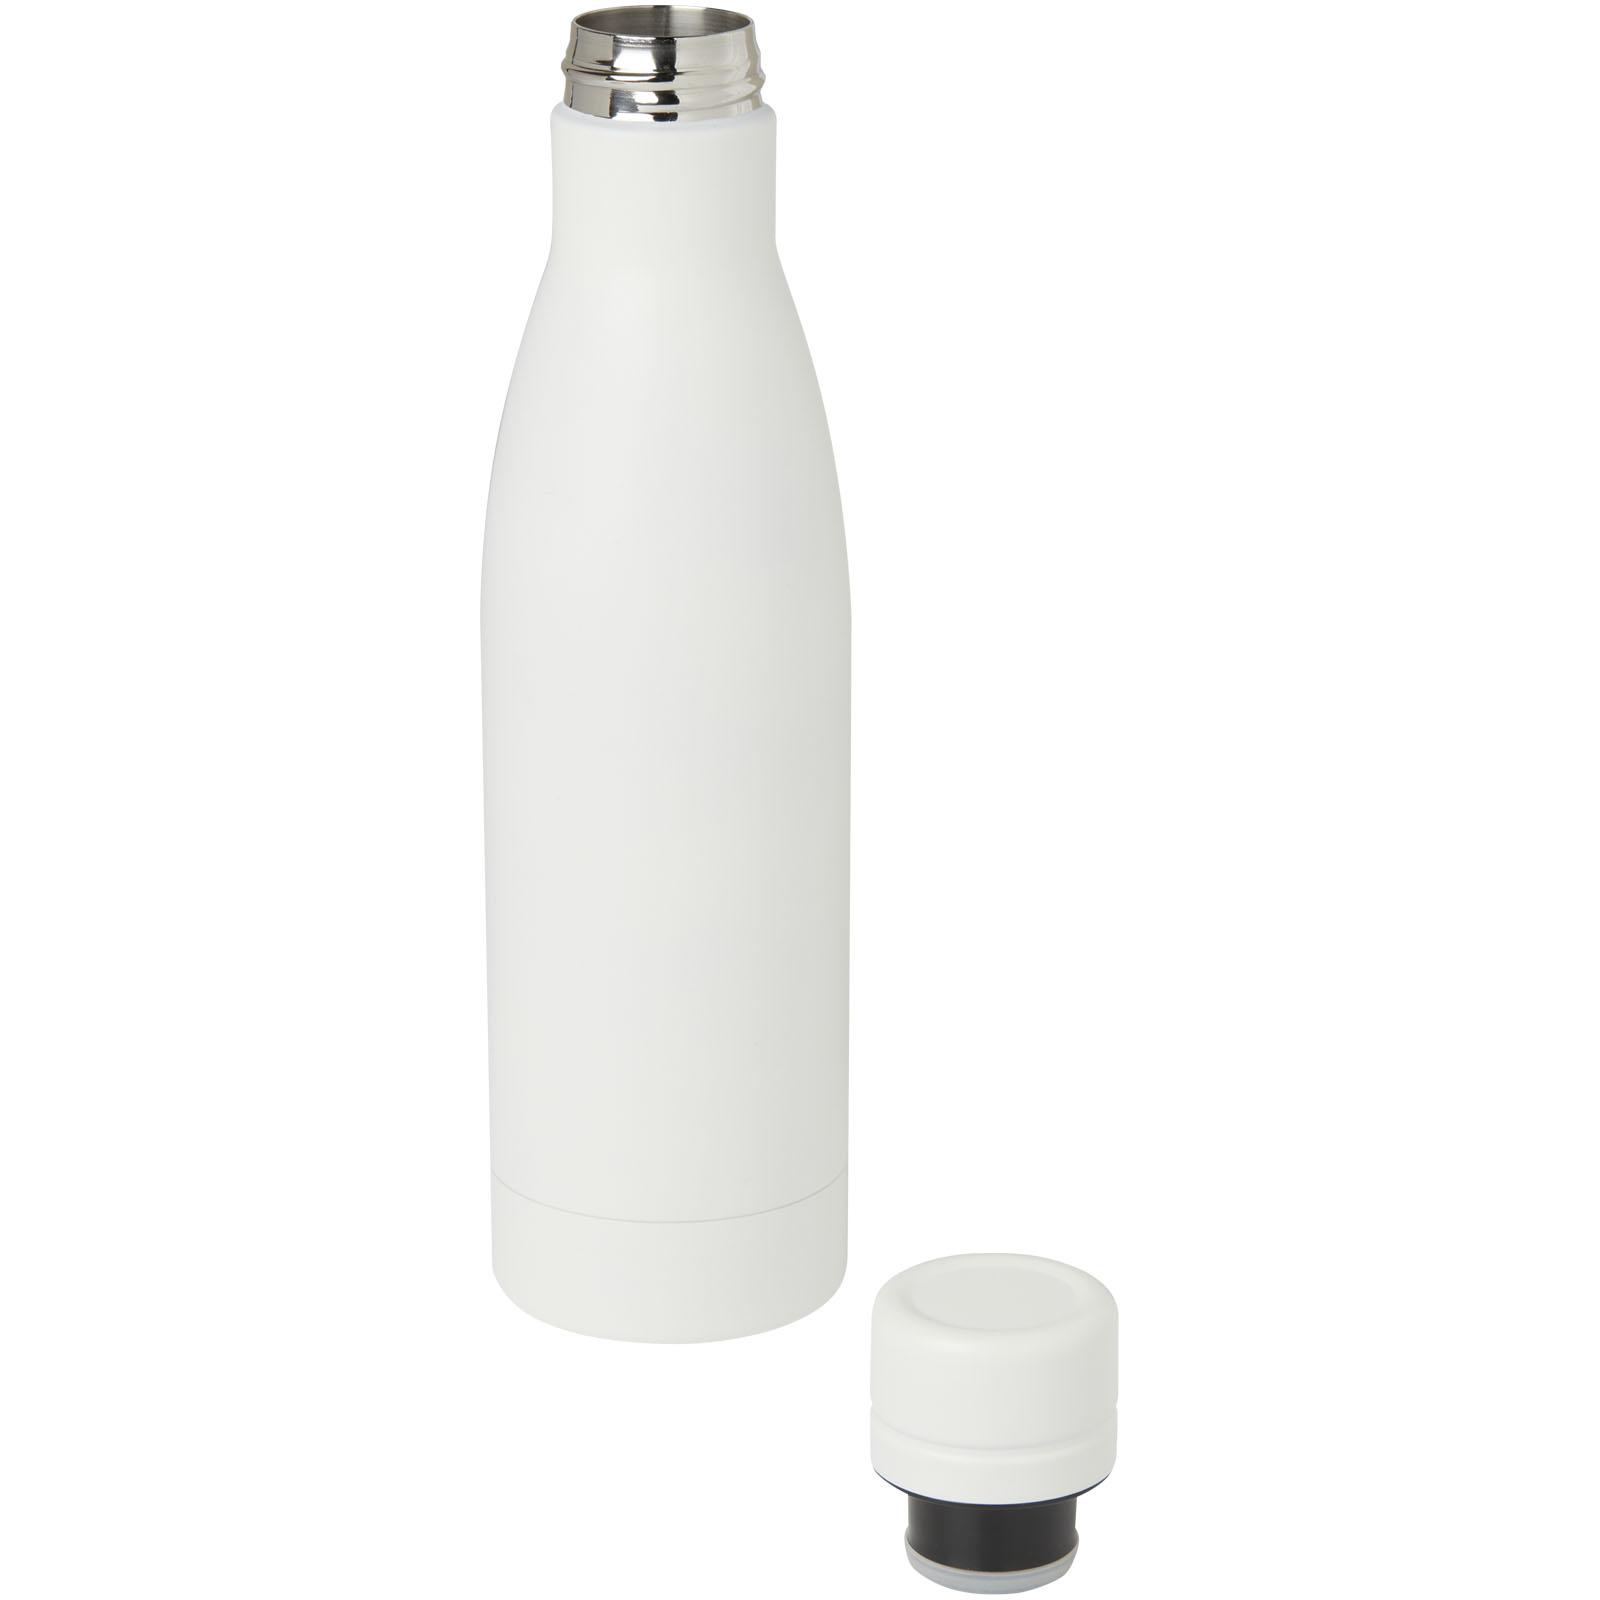 Advertising Insulated bottles - Vasa 500 ml RCS certified recycled stainless steel copper vacuum insulated bottle - 3